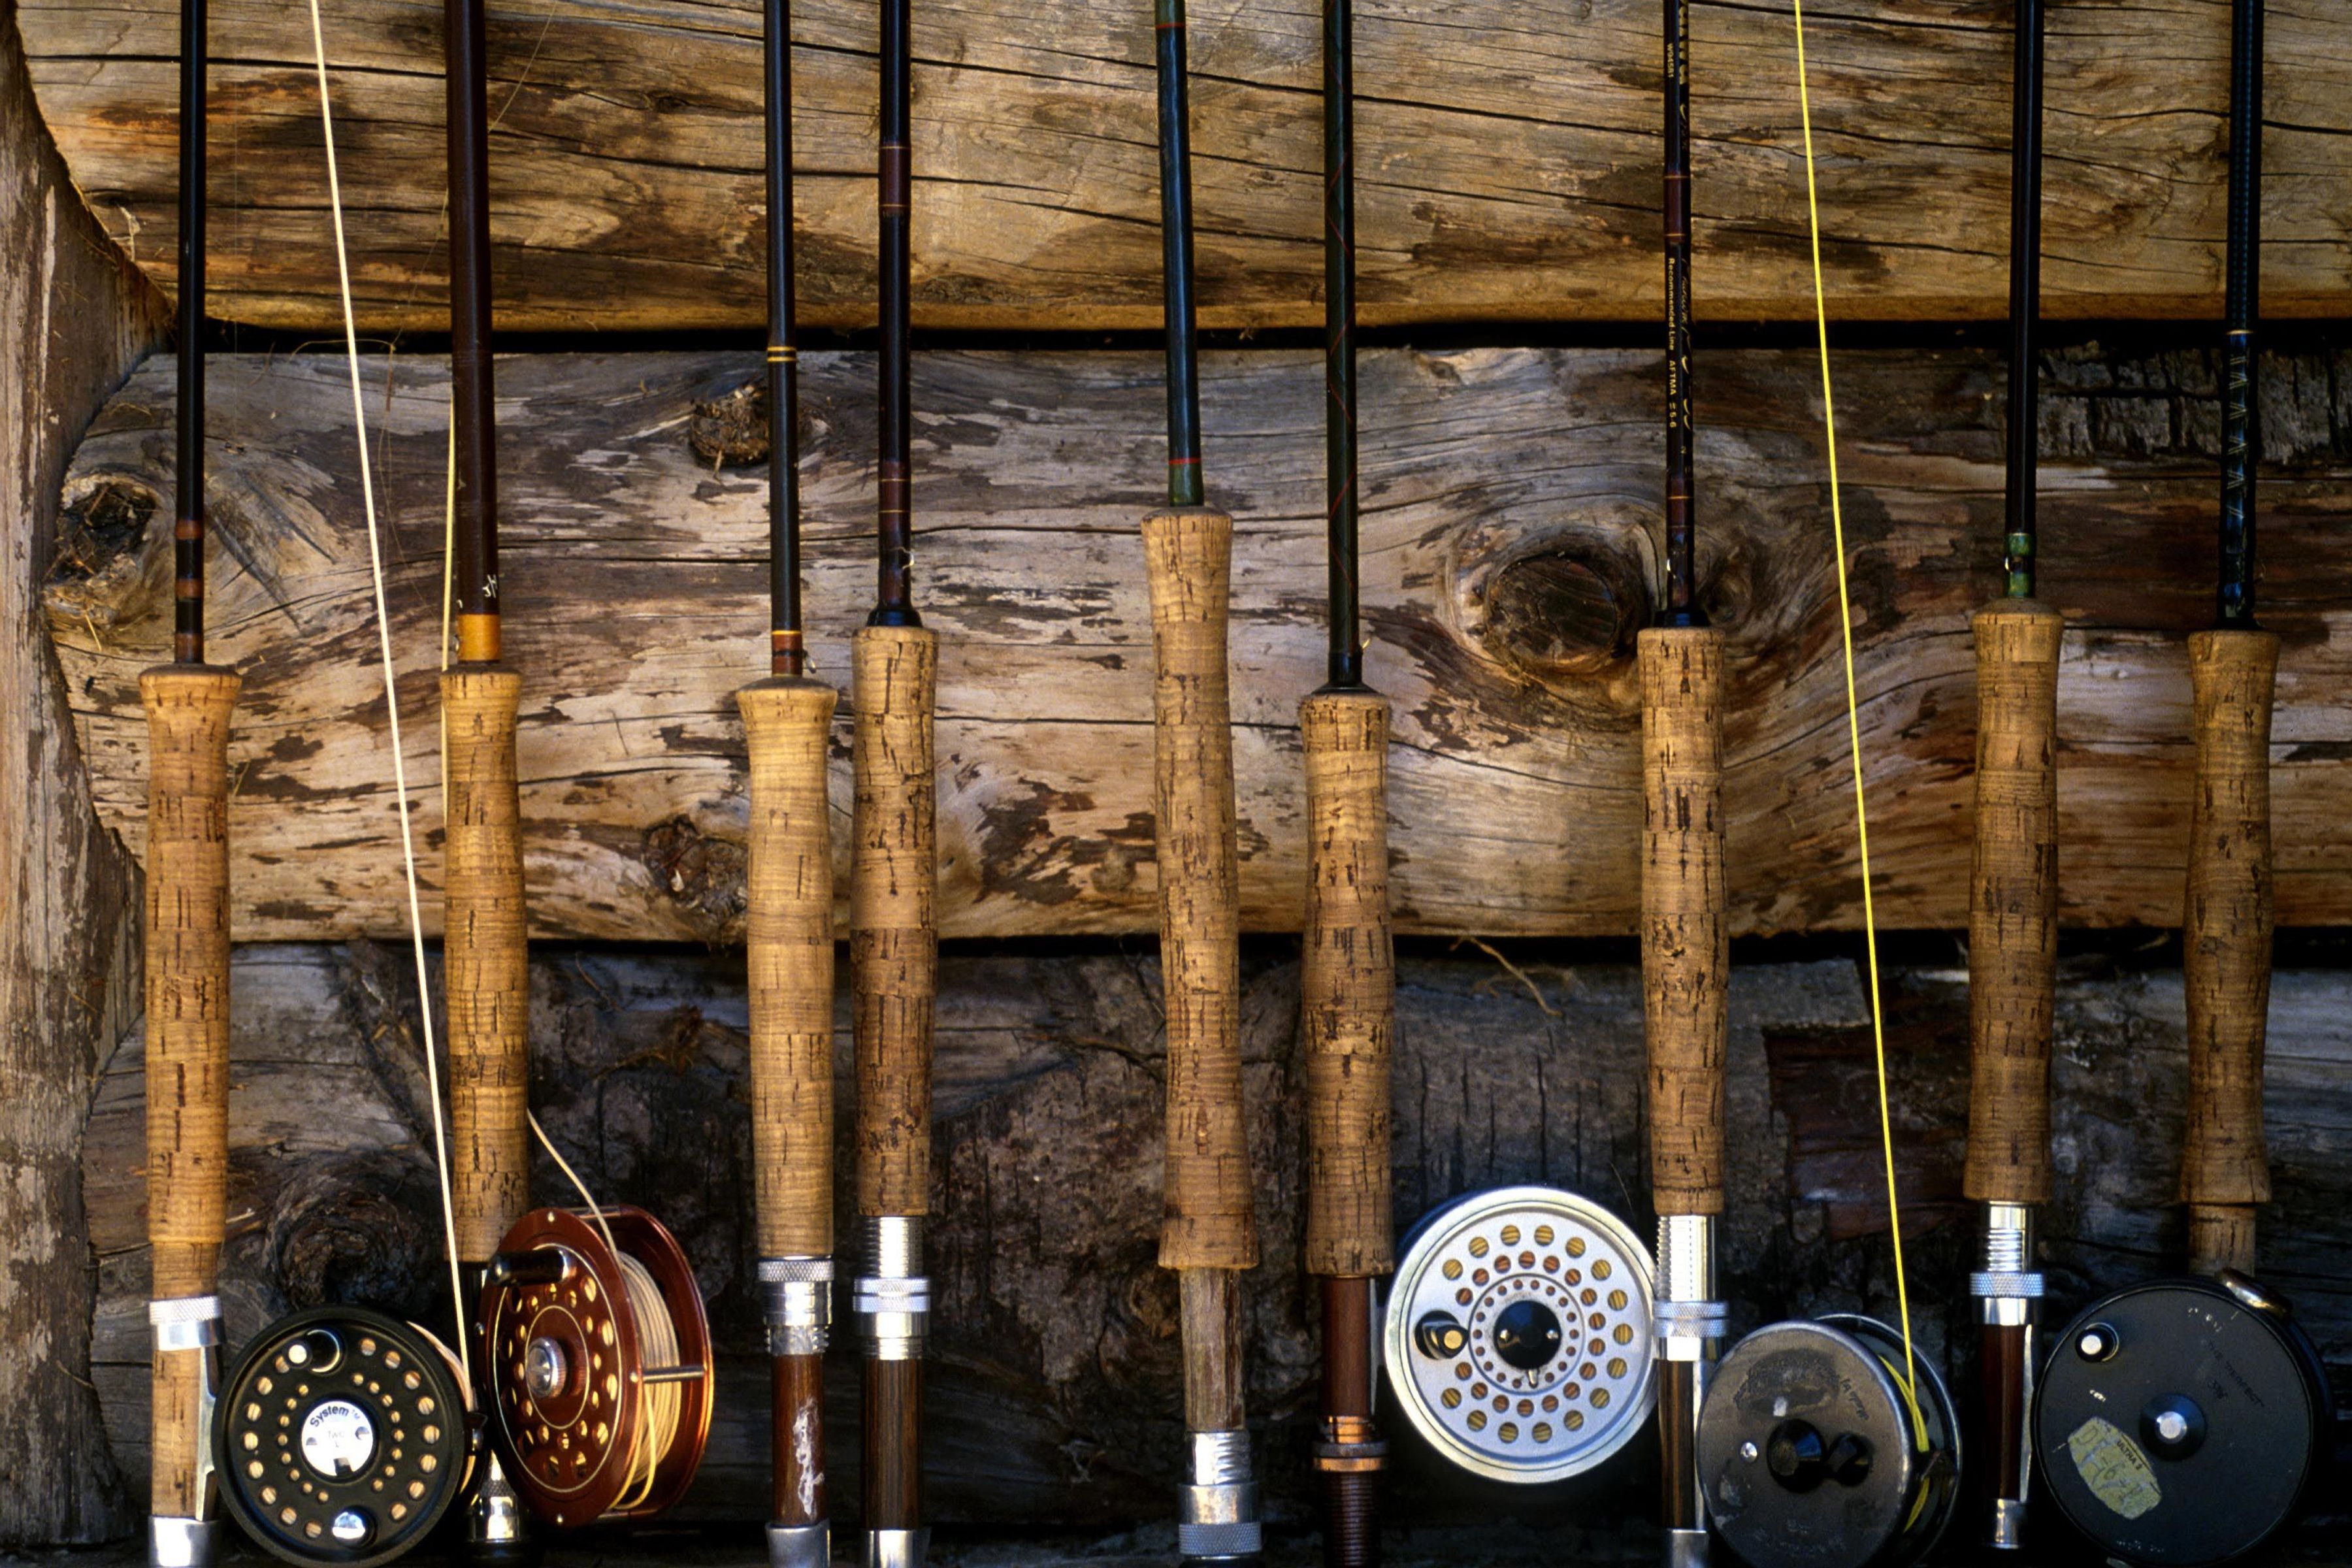 Join Jeremy Jones for a Personalized Fly-Fishing Experience with his Wasatch Guide Service!